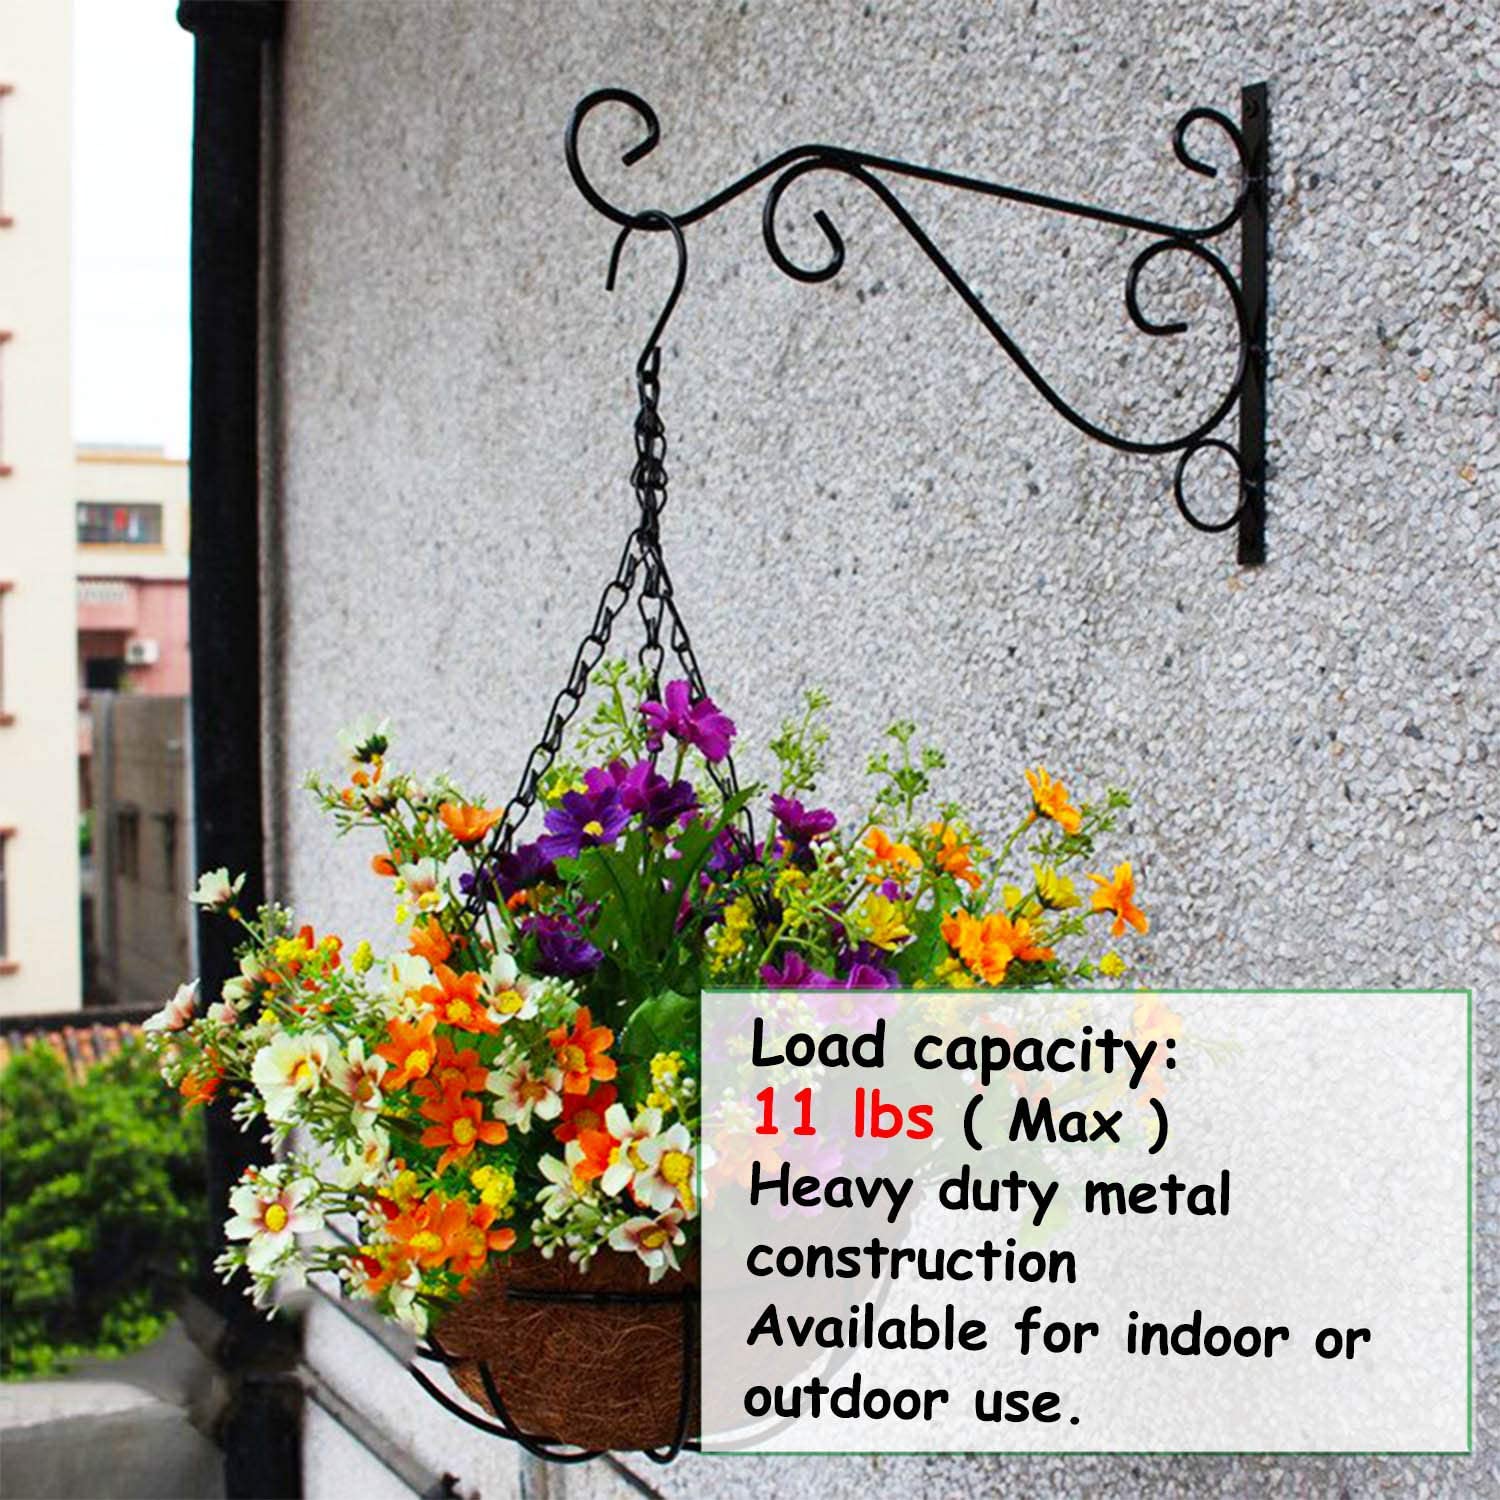 2 Pieces Wall Hanging Plant Hook With Screw Holder Plant Hook Lantern Bird Feeders Metal Garden Basket For Balcony Garden Decoration (Geometry) - image 3 of 5